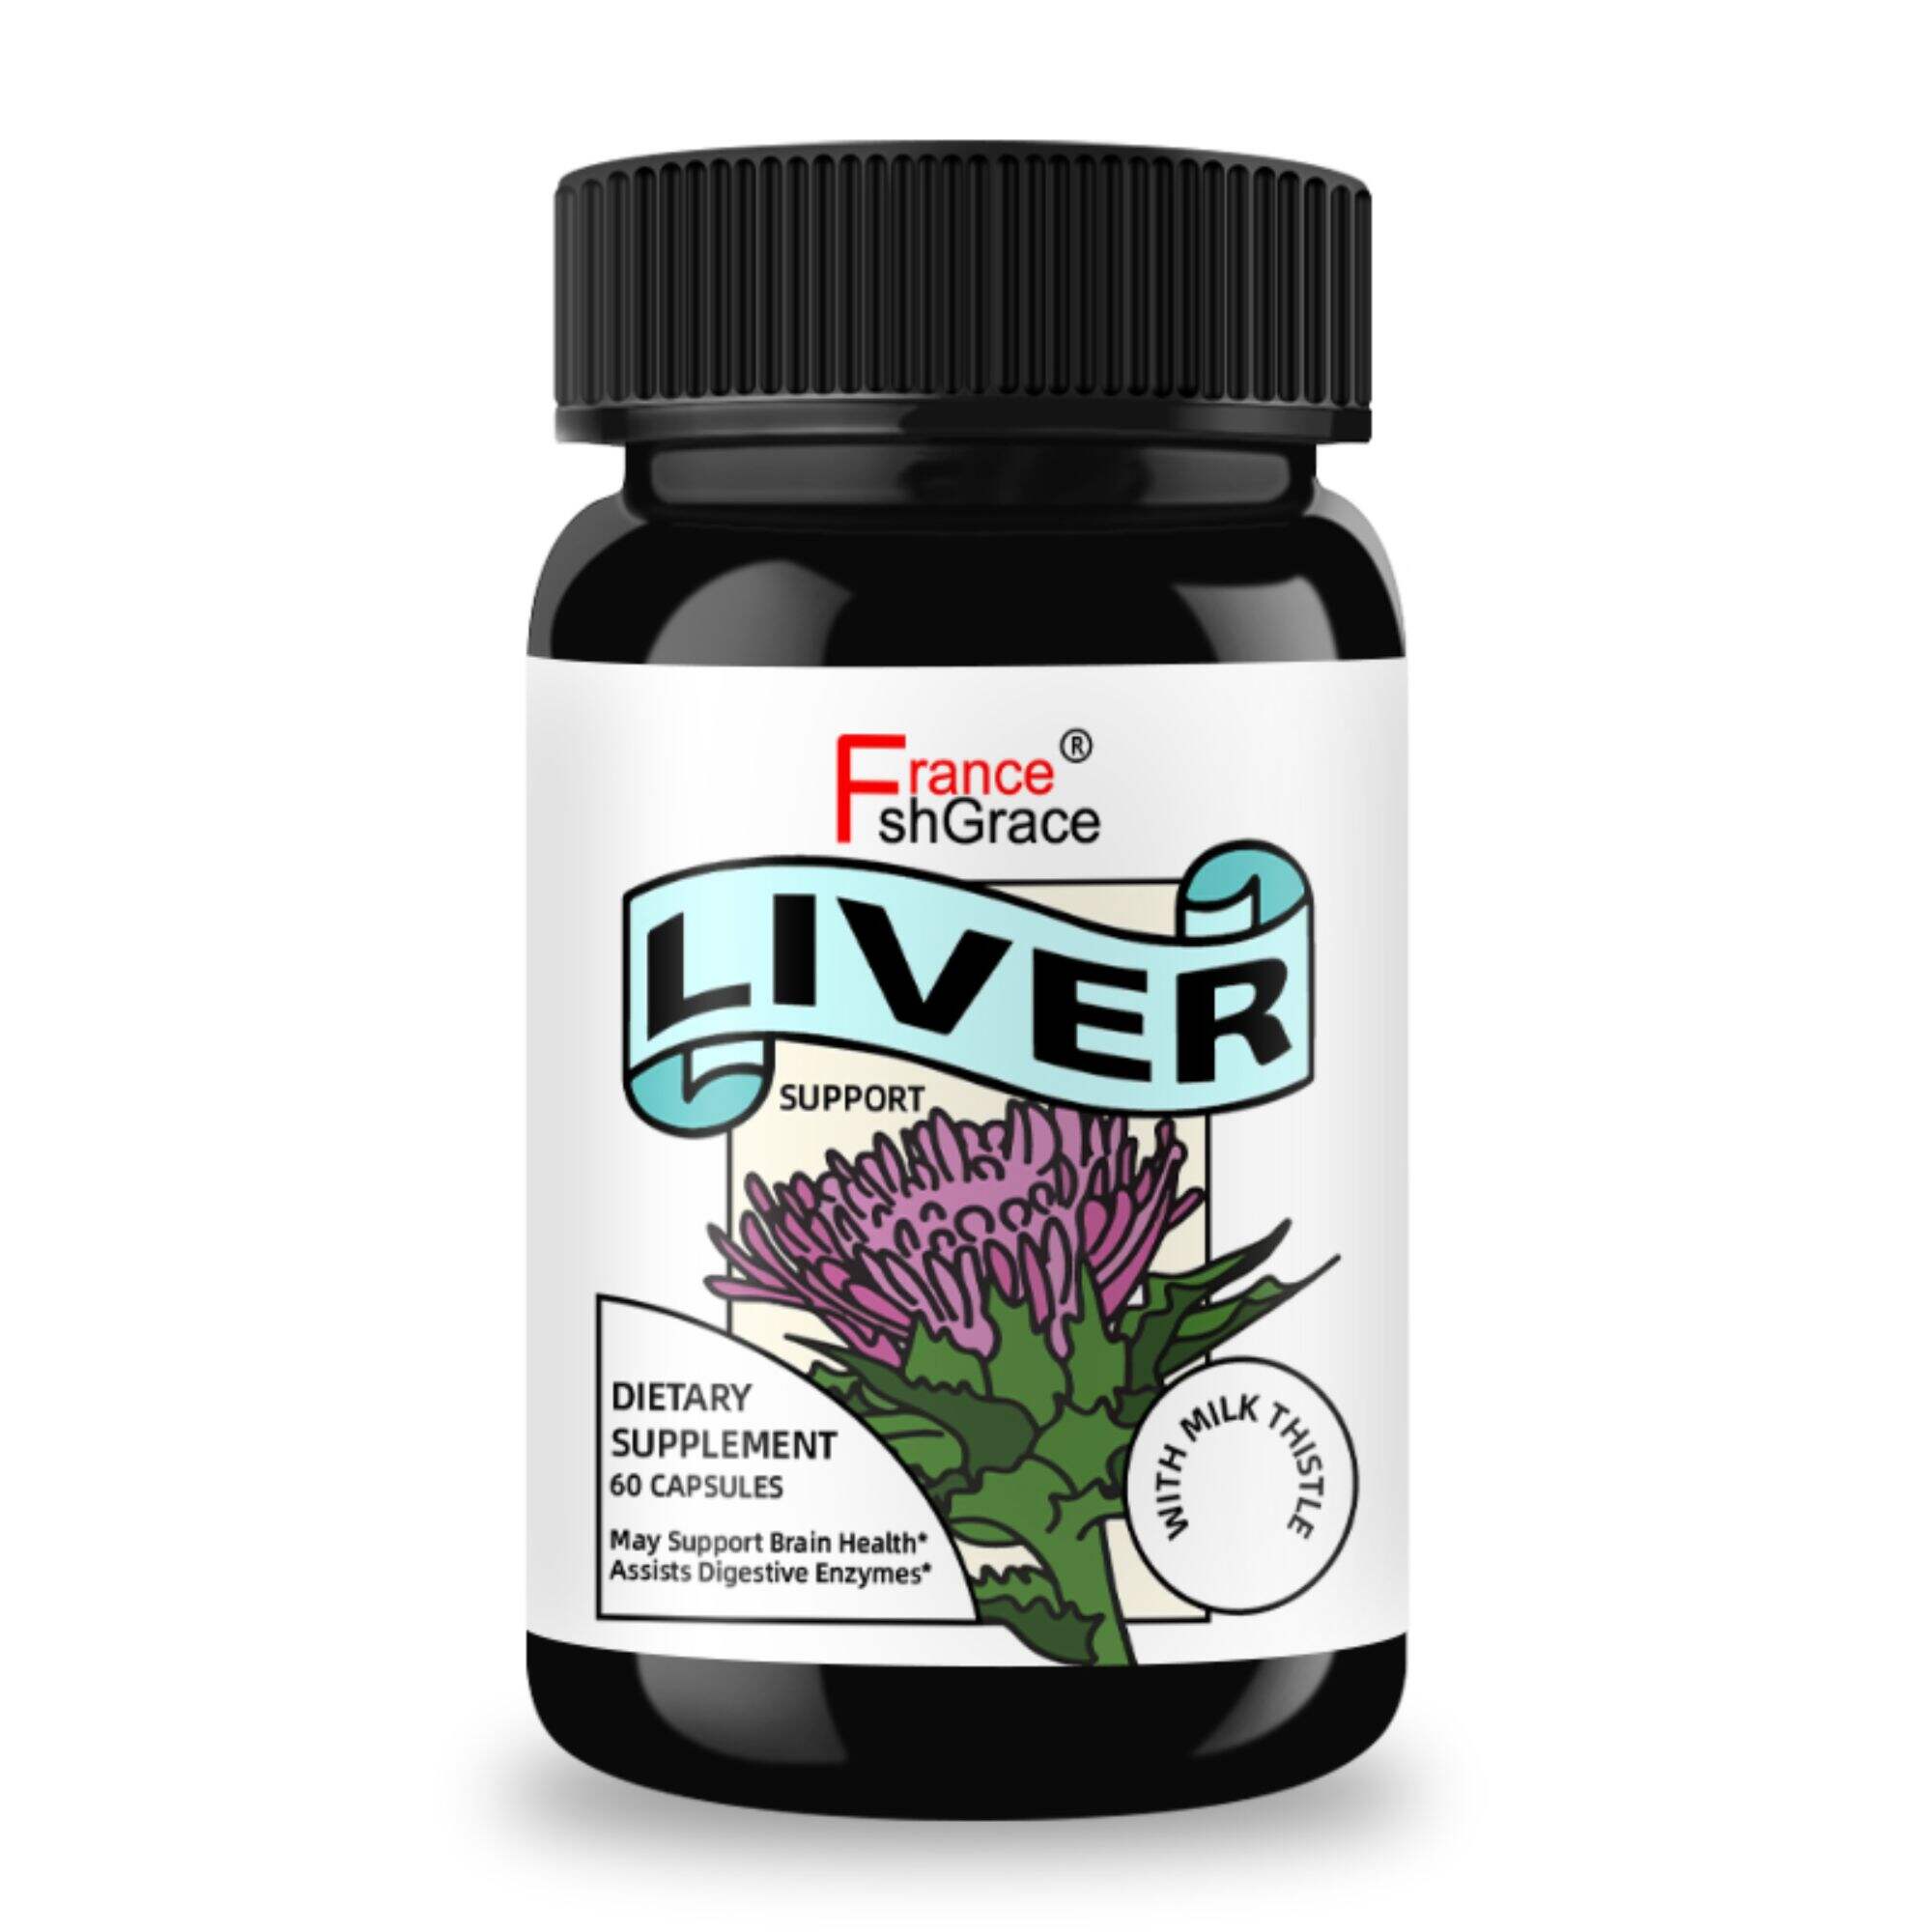 Liver cleansing detoxification and repair complex 60 capsules- silymarin